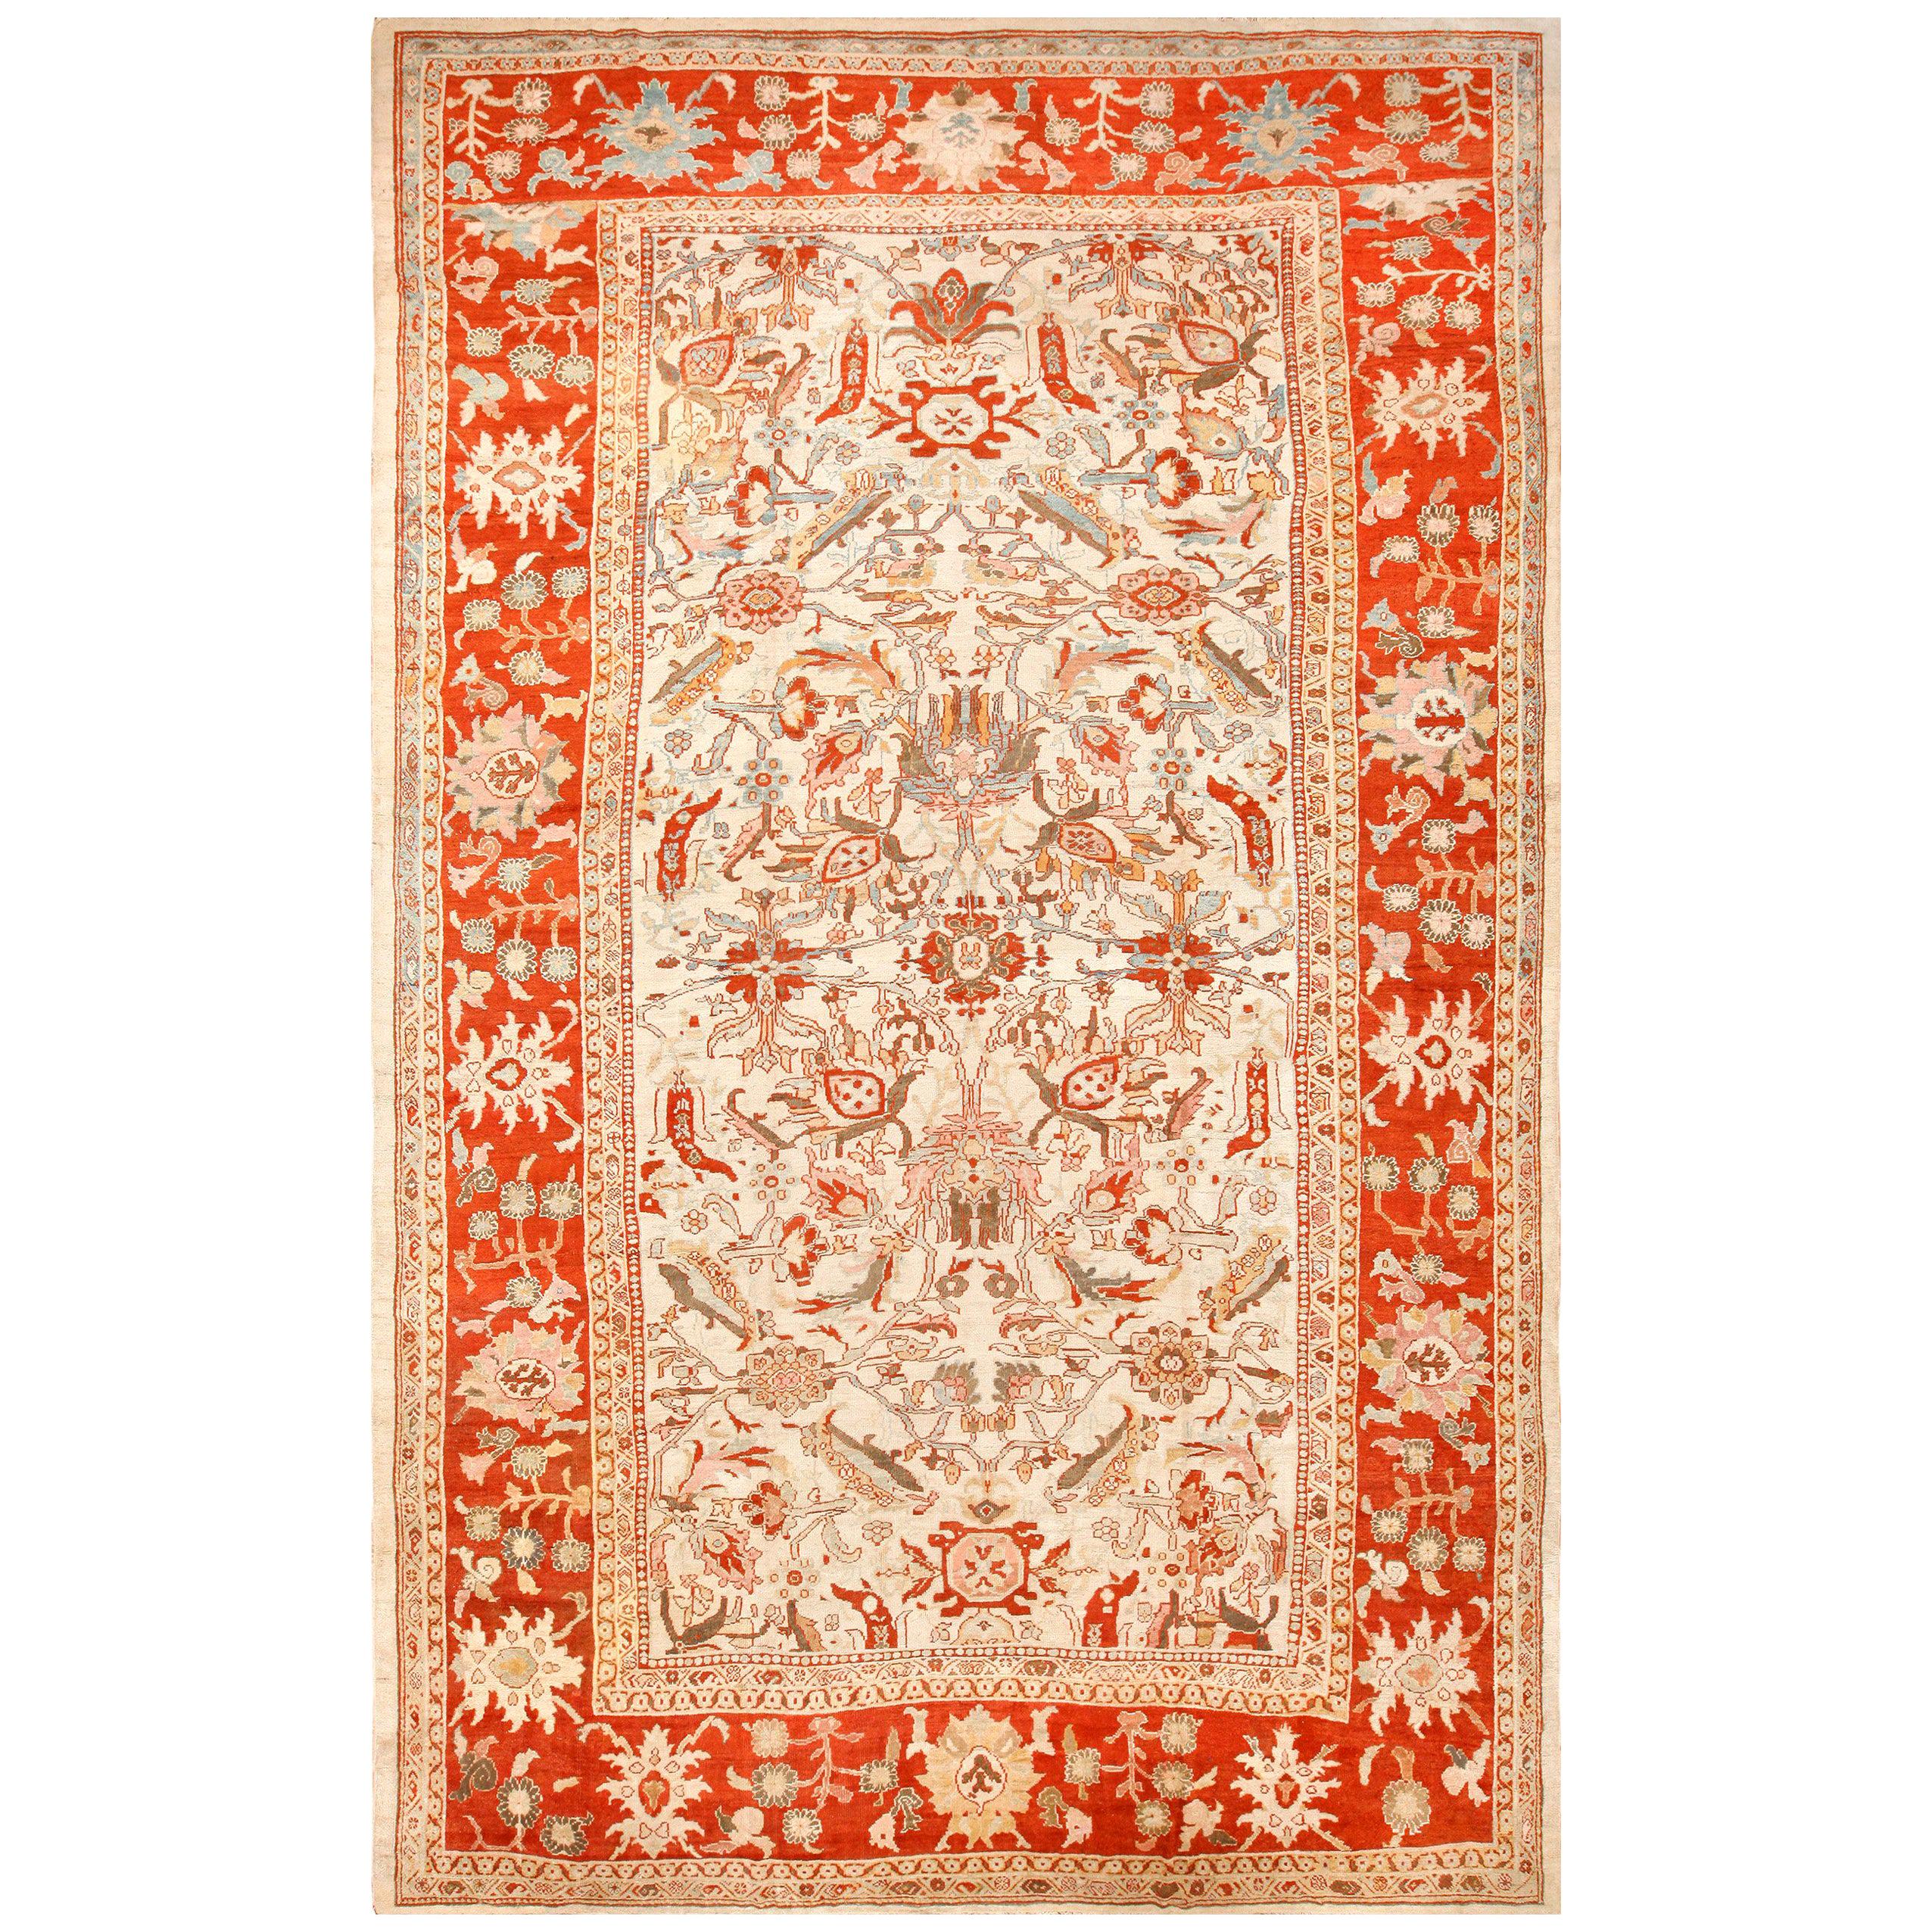 What is a Ziegler rug?